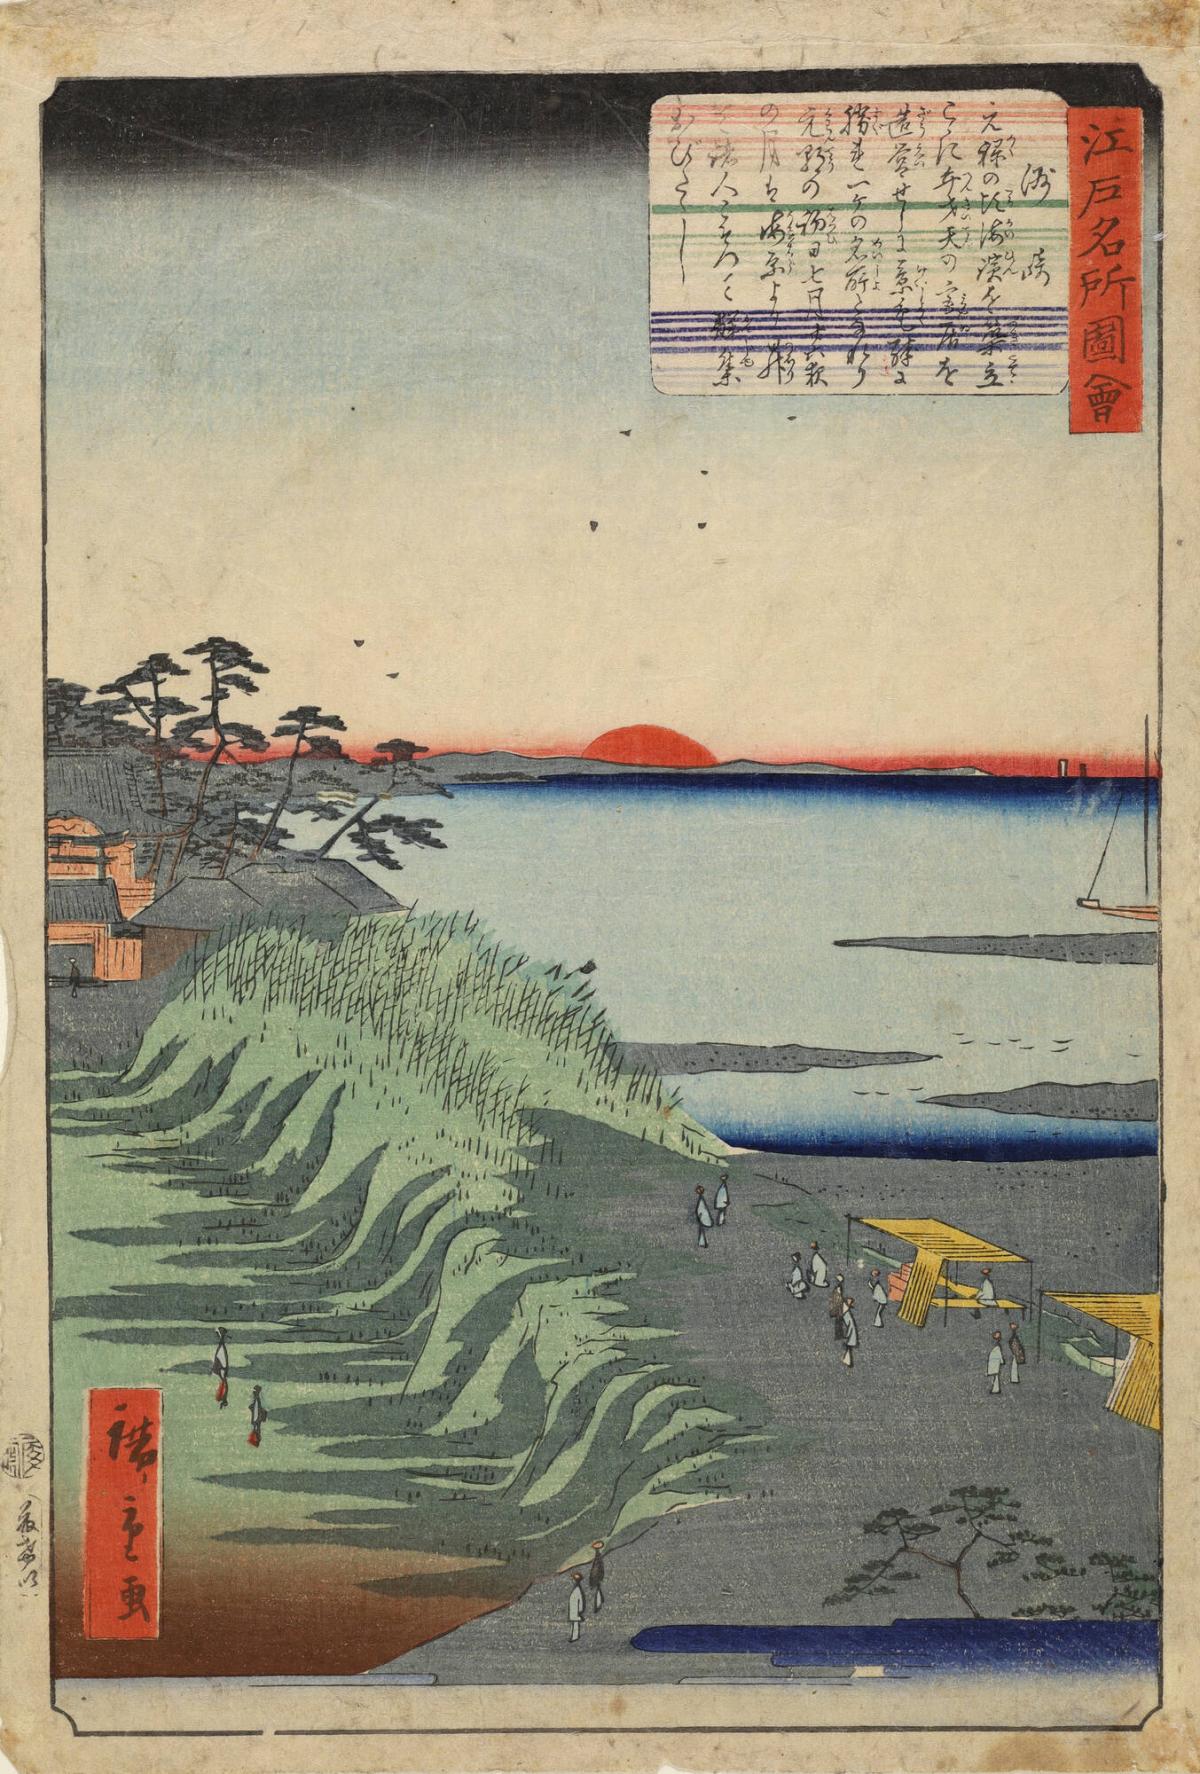 Sunrise at Susaki, from the series One Hundred Famous Views of Edo